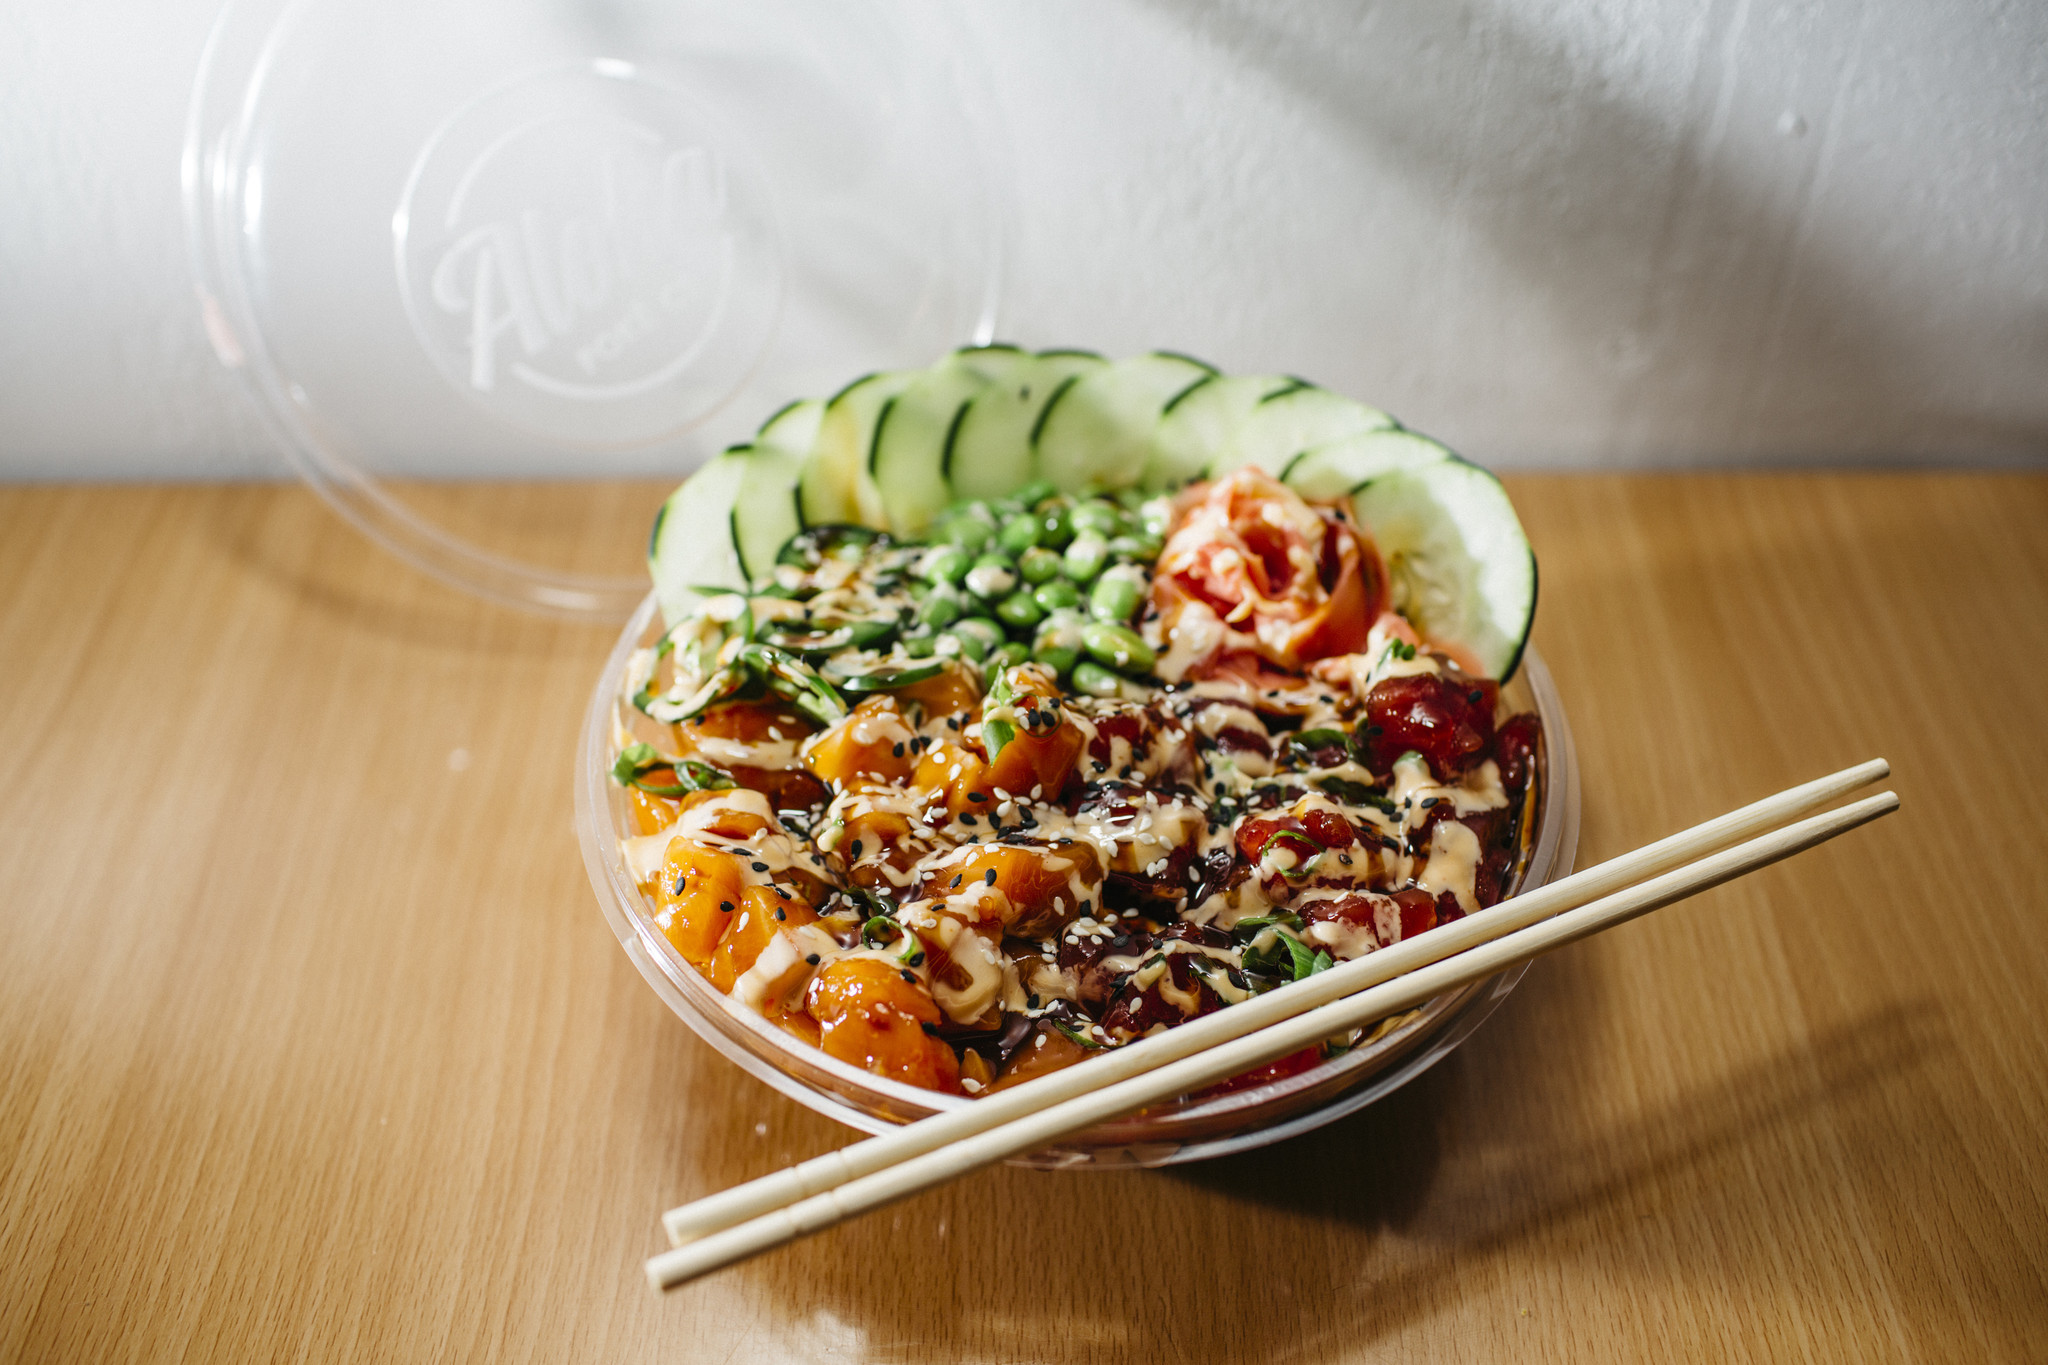 aloha-poke-is-solving-lunchtime-woes-with-build-your-own-bowls-redeye